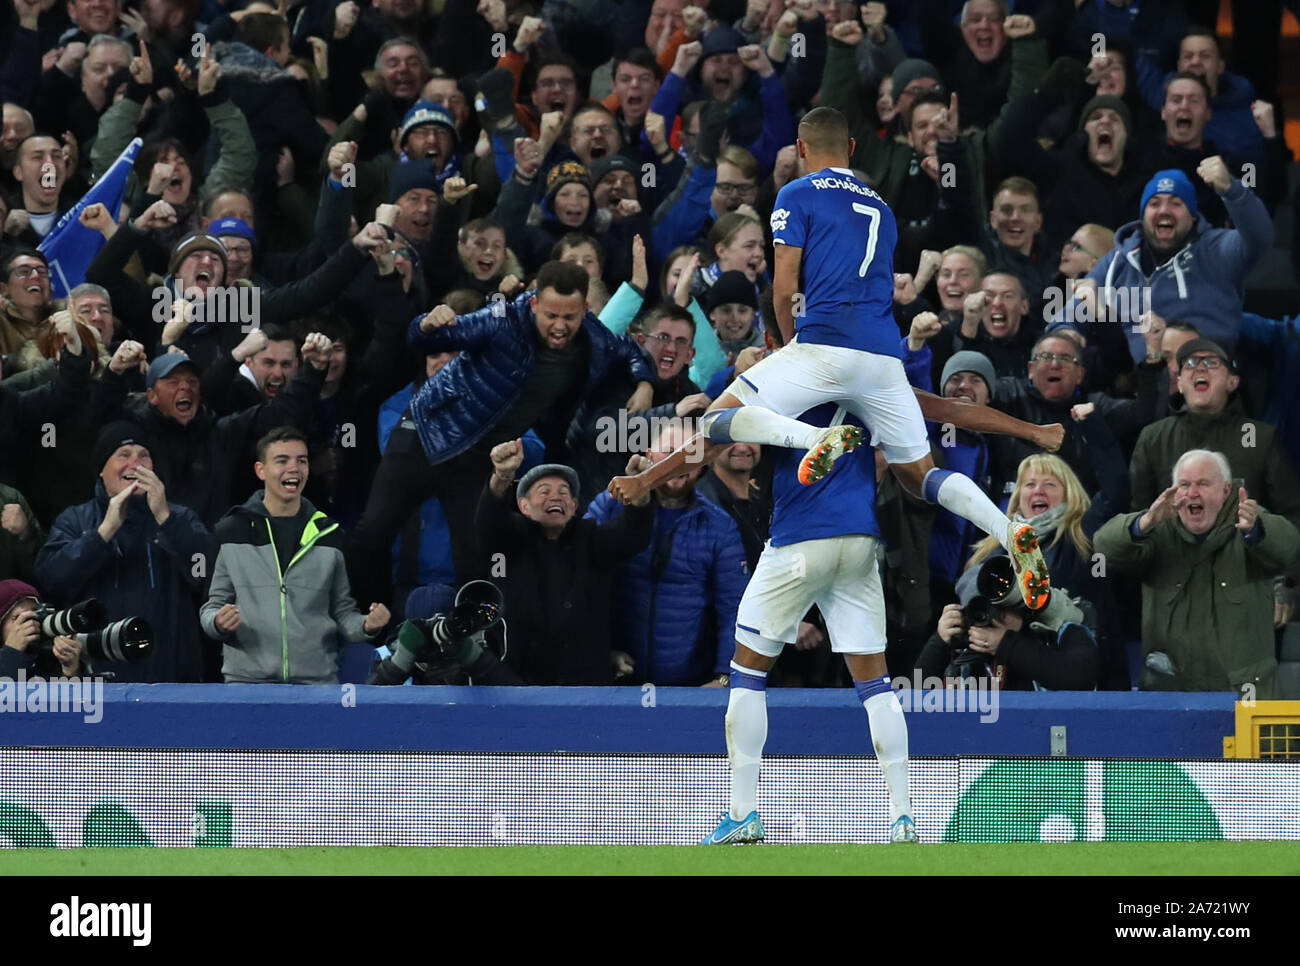 Goodison Park, Liverpool, Merseyside, UK. 29th Oct, 2019. English Football League Cup, Carabao Cup Football, Everton versus Watford; Mason Holgate of Everton celebrates with team mate Richarlison in front of supporters at the Gwladys Street end after scoring the opening goal after 72 minutes - Strictly Editorial Use Only. No use with unauthorized audio, video, data, fixture lists, club/league logos or 'live' services. Online in-match use limited to 120 images, no video emulation. No use in betting, games or single club/league/player publications Credit: Action Plus Sports/Alamy Live News Stock Photo